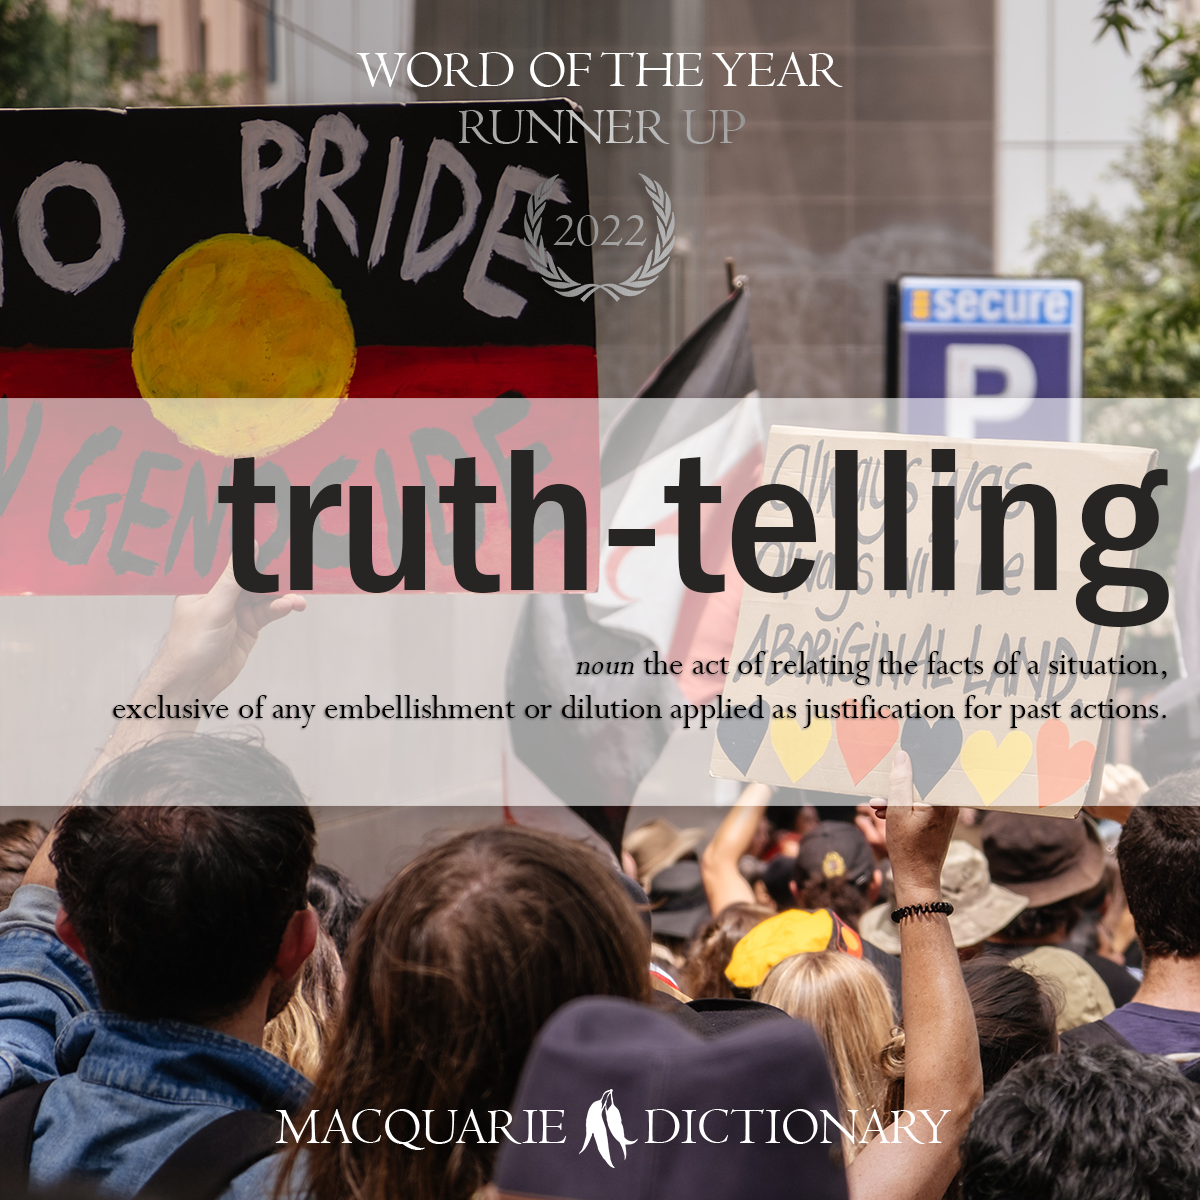 Word of the Year 2022 - truth-telling